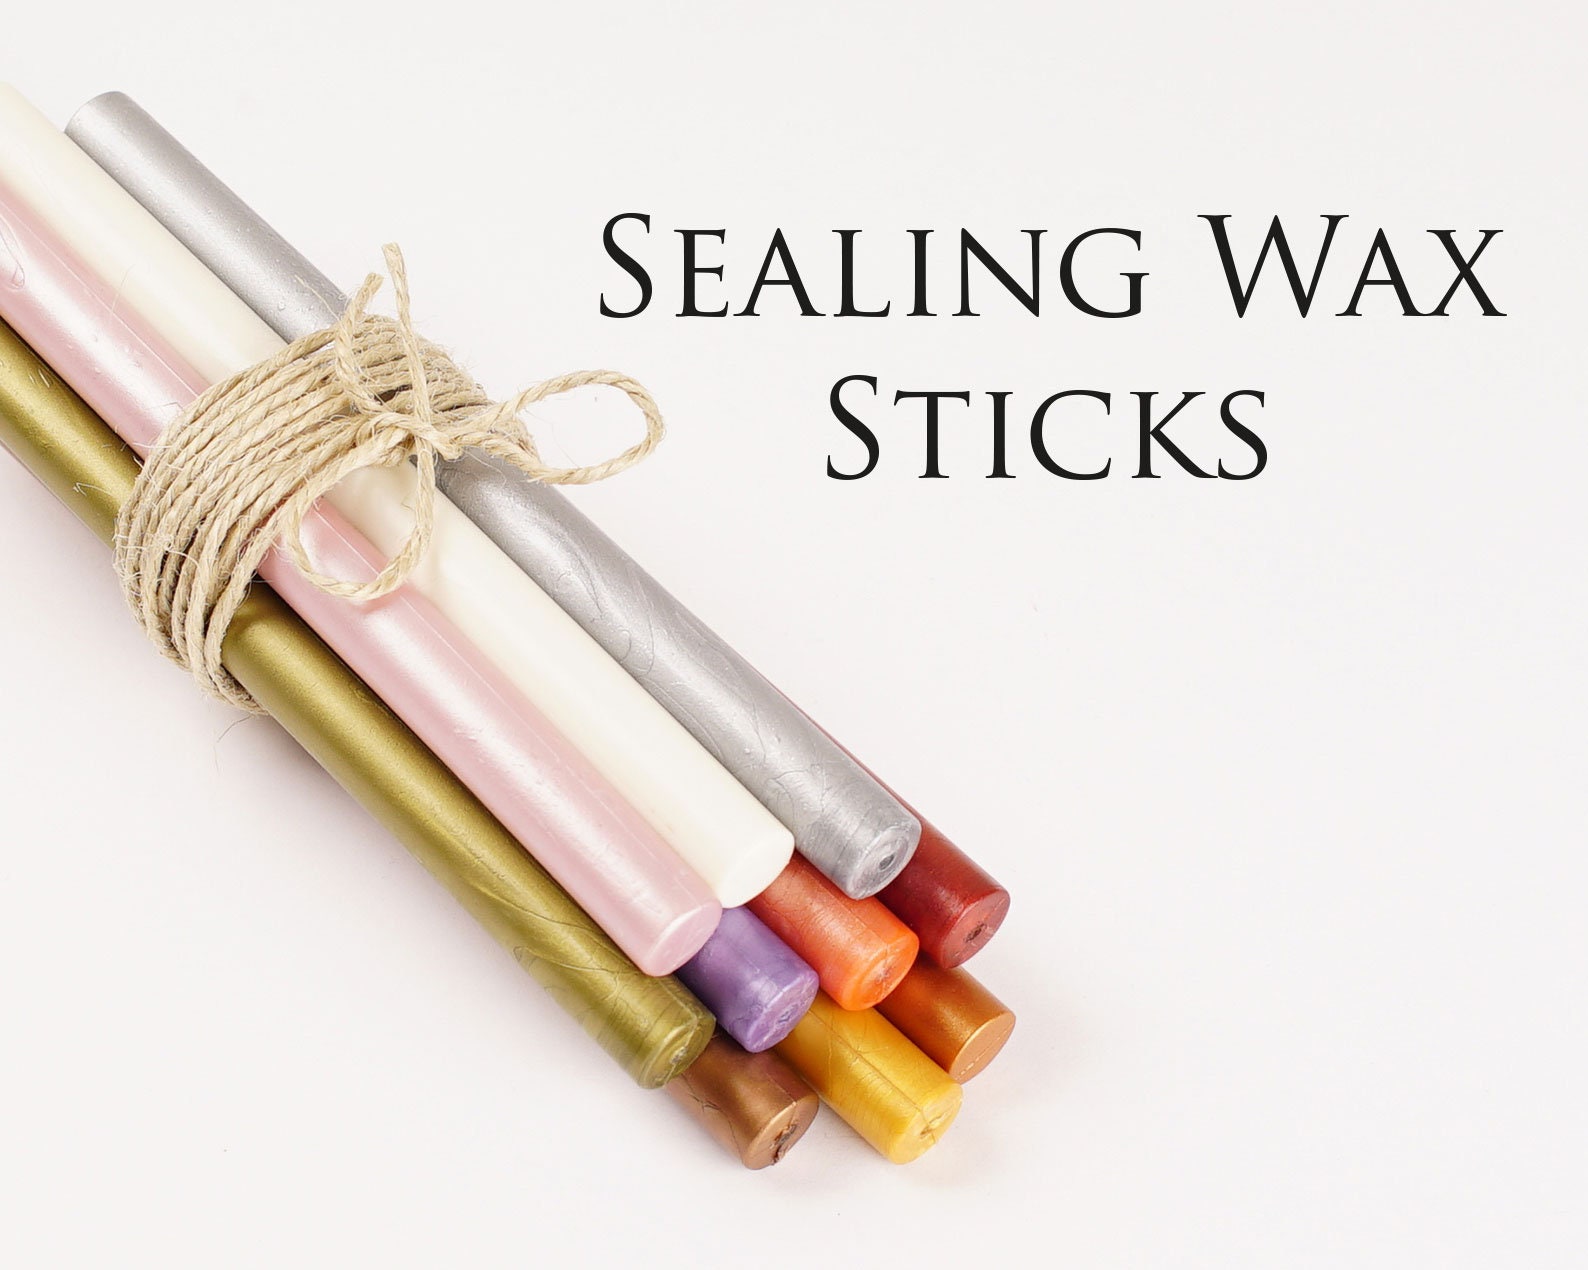 Gold Wax Seal Sticks, HOSAIL 20pcs Gold Wax Sealing Sticks Beads Great for  Wax Sealing Stamp, Can Be Used in Glue Gun, Wax Seal Warmer and Sealing Wax